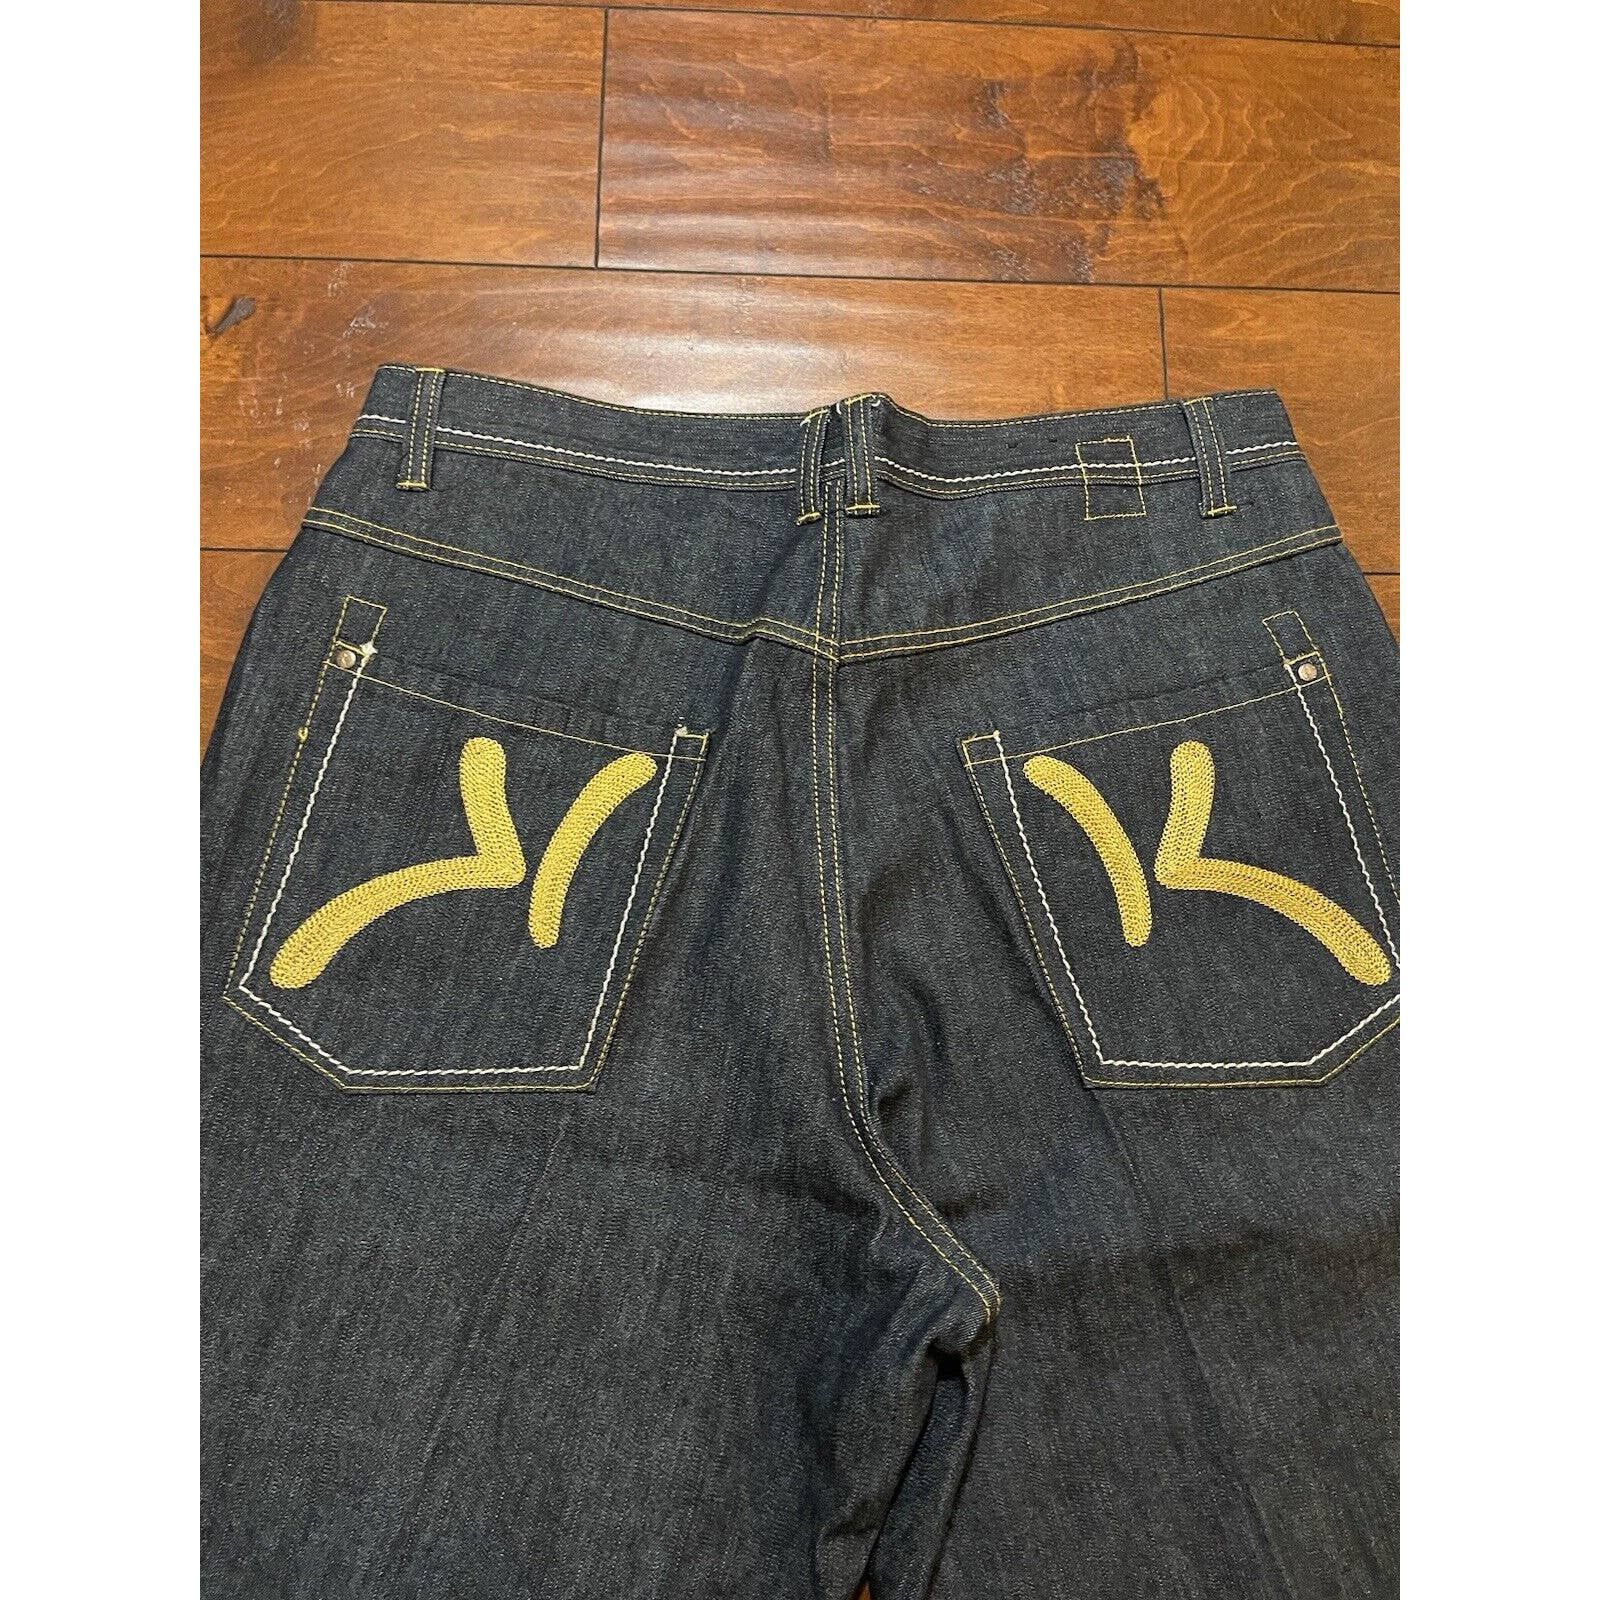 Kani Extremely baggy y2k Kani Gold “JNCO style” Size 38x15 | Grailed